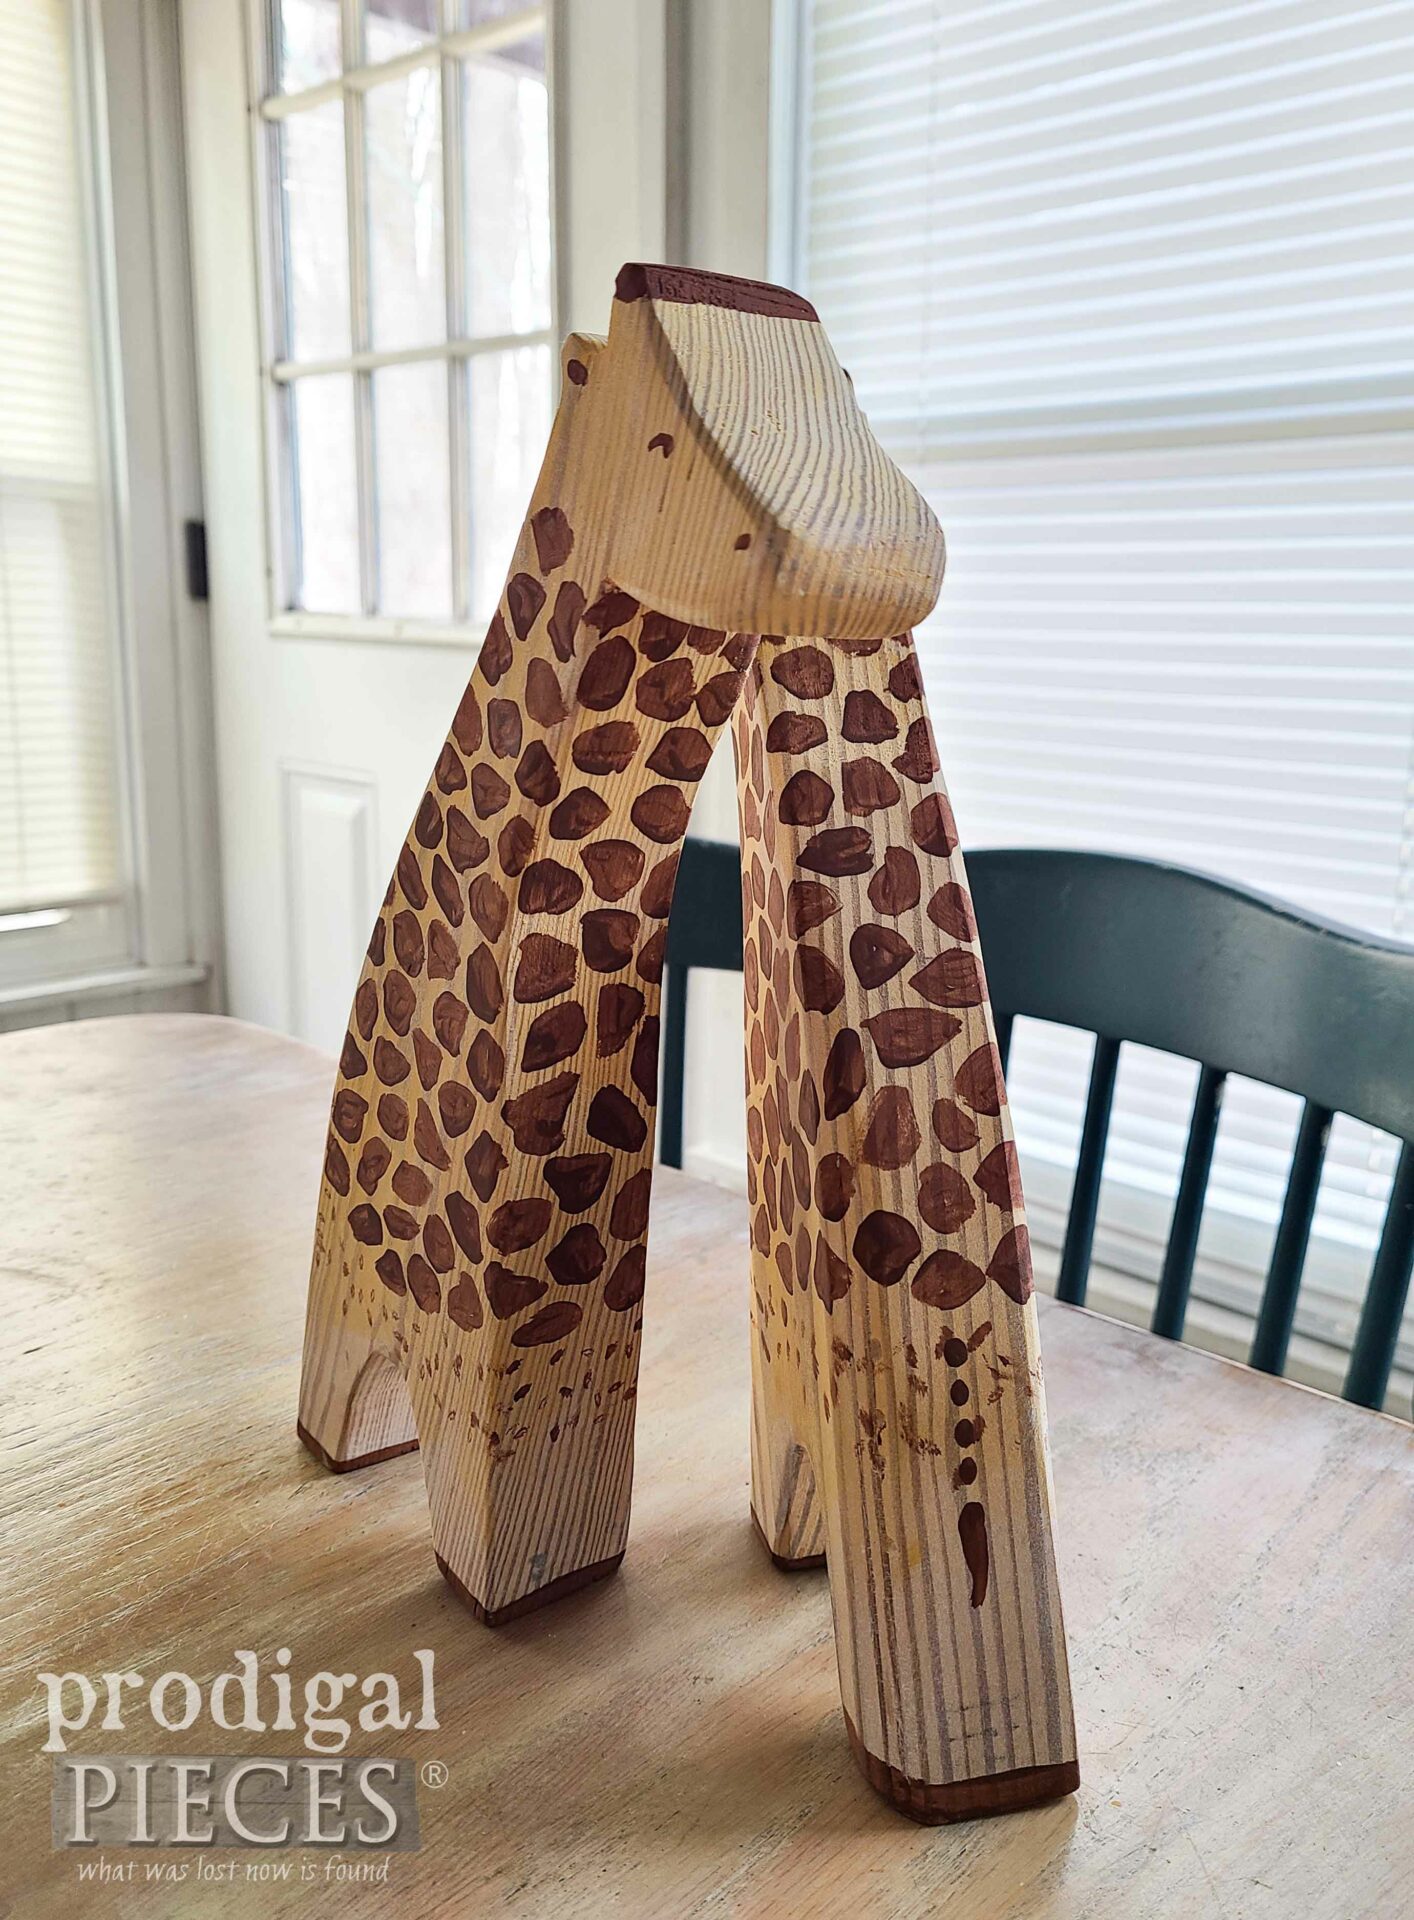 Hugging Giraffe Toys for Reclaimed Wooden Play by Larissa of Prodigal Pieces | prodigalpieces.com #prodigalpieces